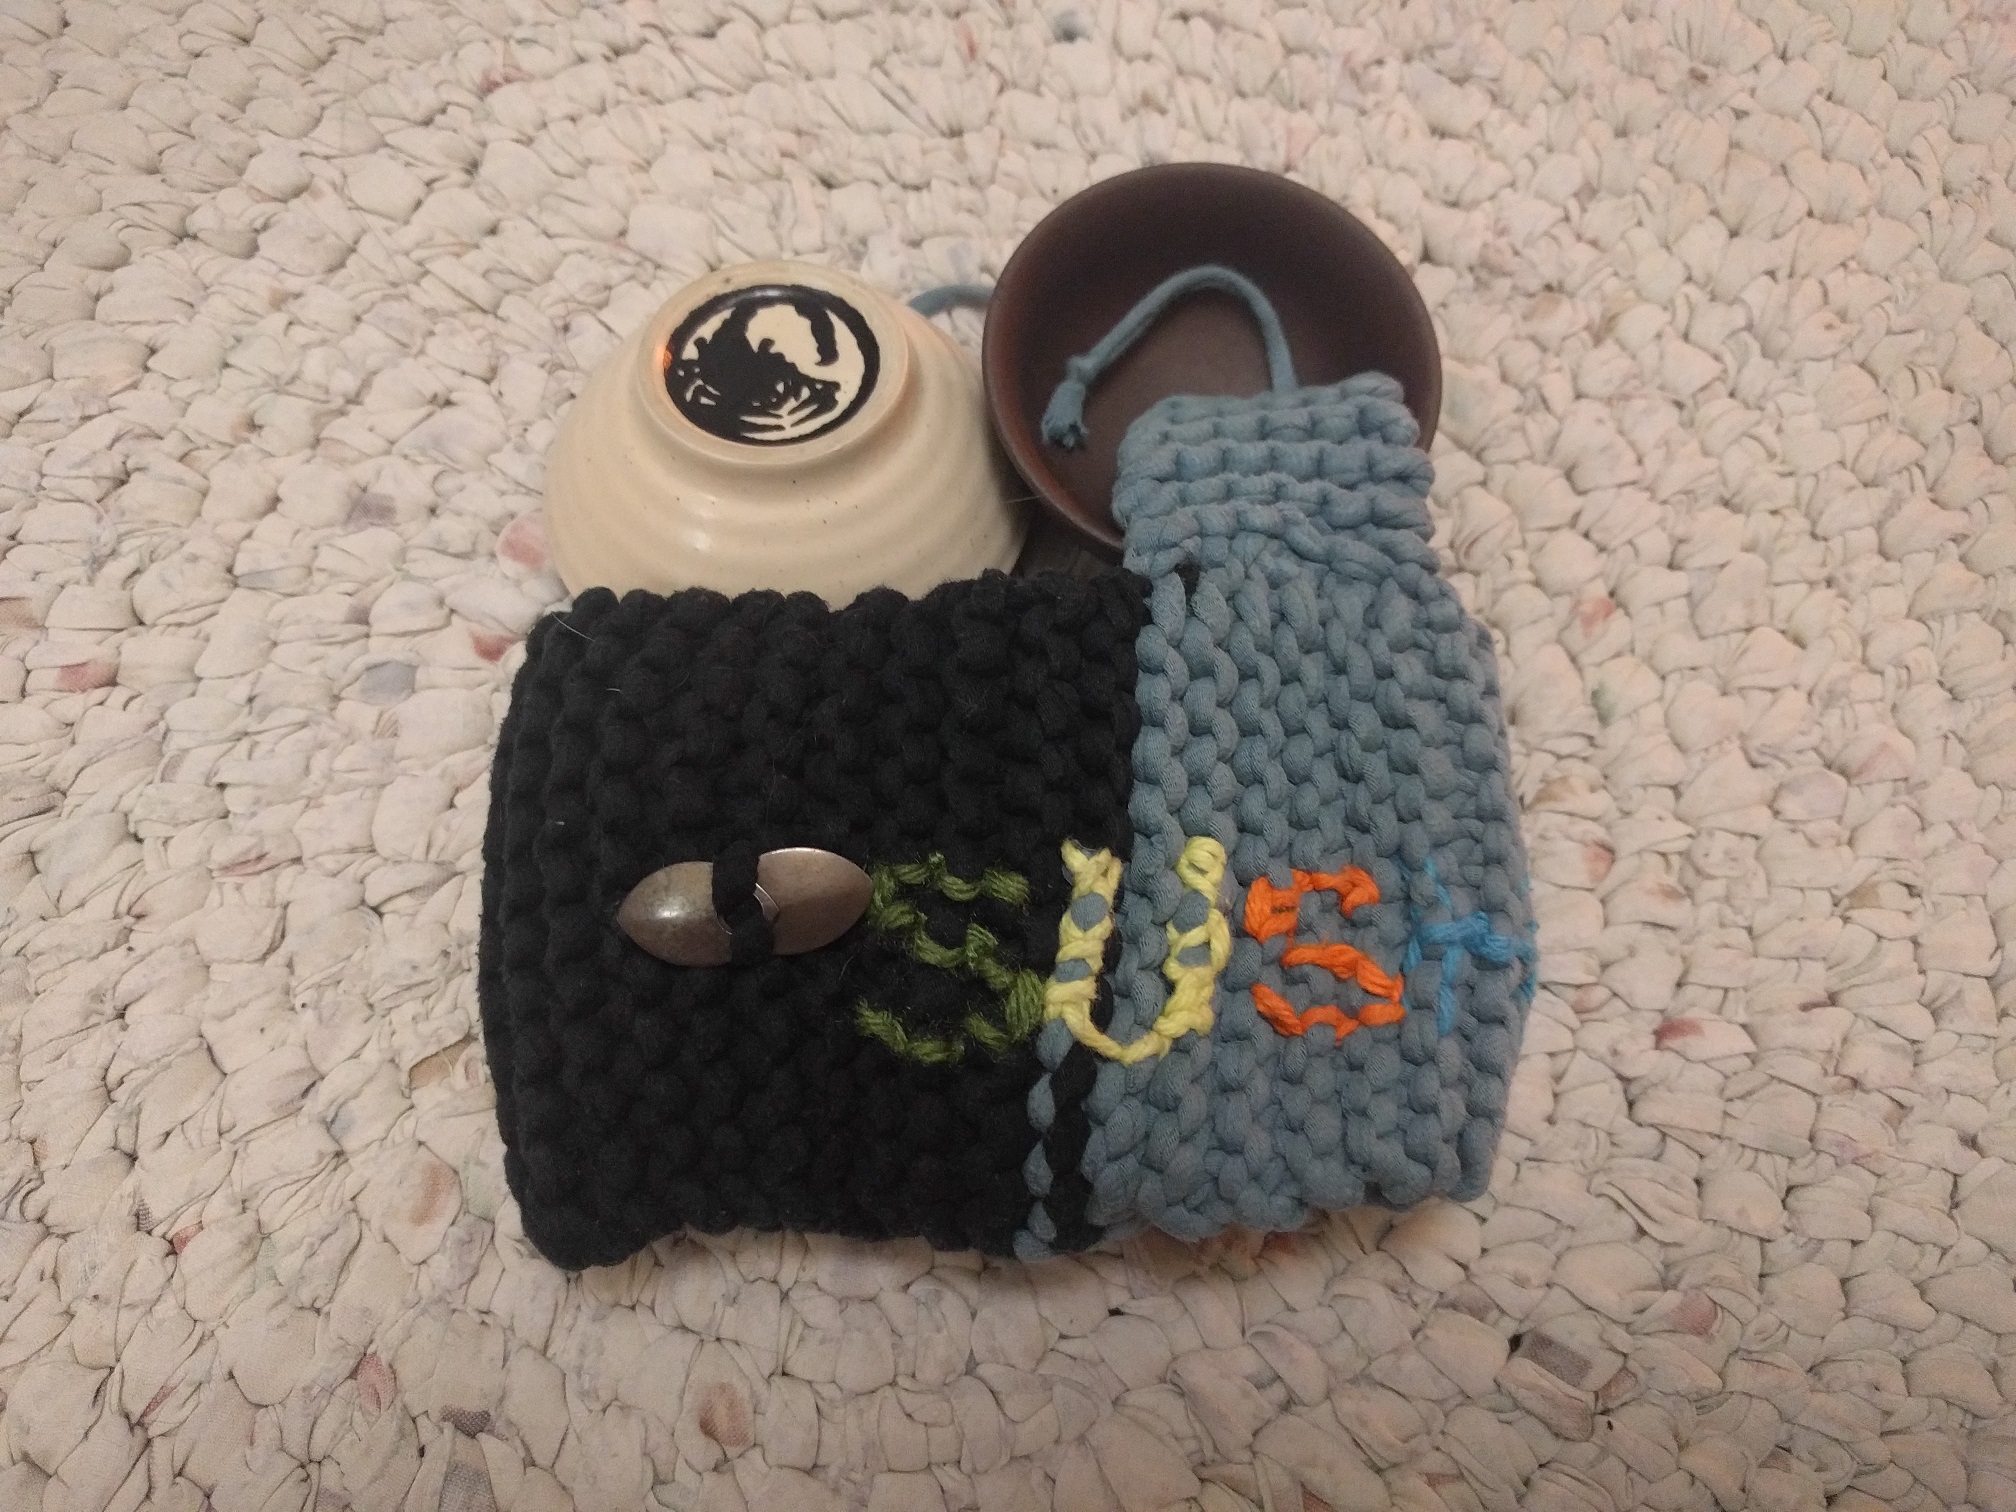 A teacup cozy in black and blue, with the first few letters S U S H on the front, and the two cups removed from it, all of it laying on a crocheted rug.